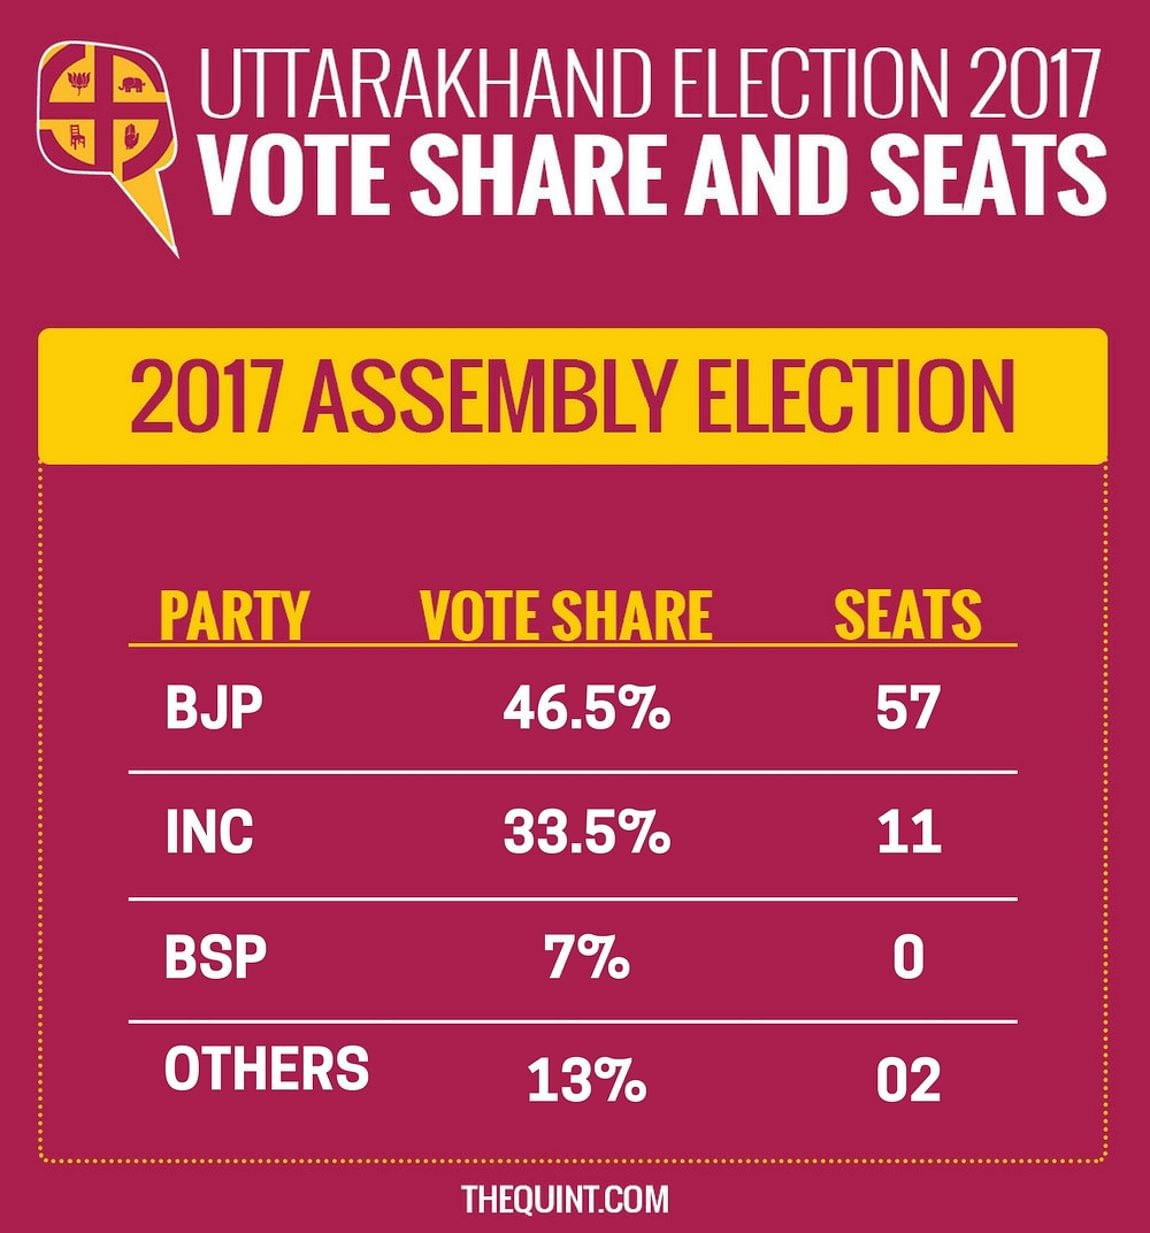 Live updates of Assembly Elections 2017 results from Uttar Pradesh, Punjab, Uttarakhand, Goa and Manipur.